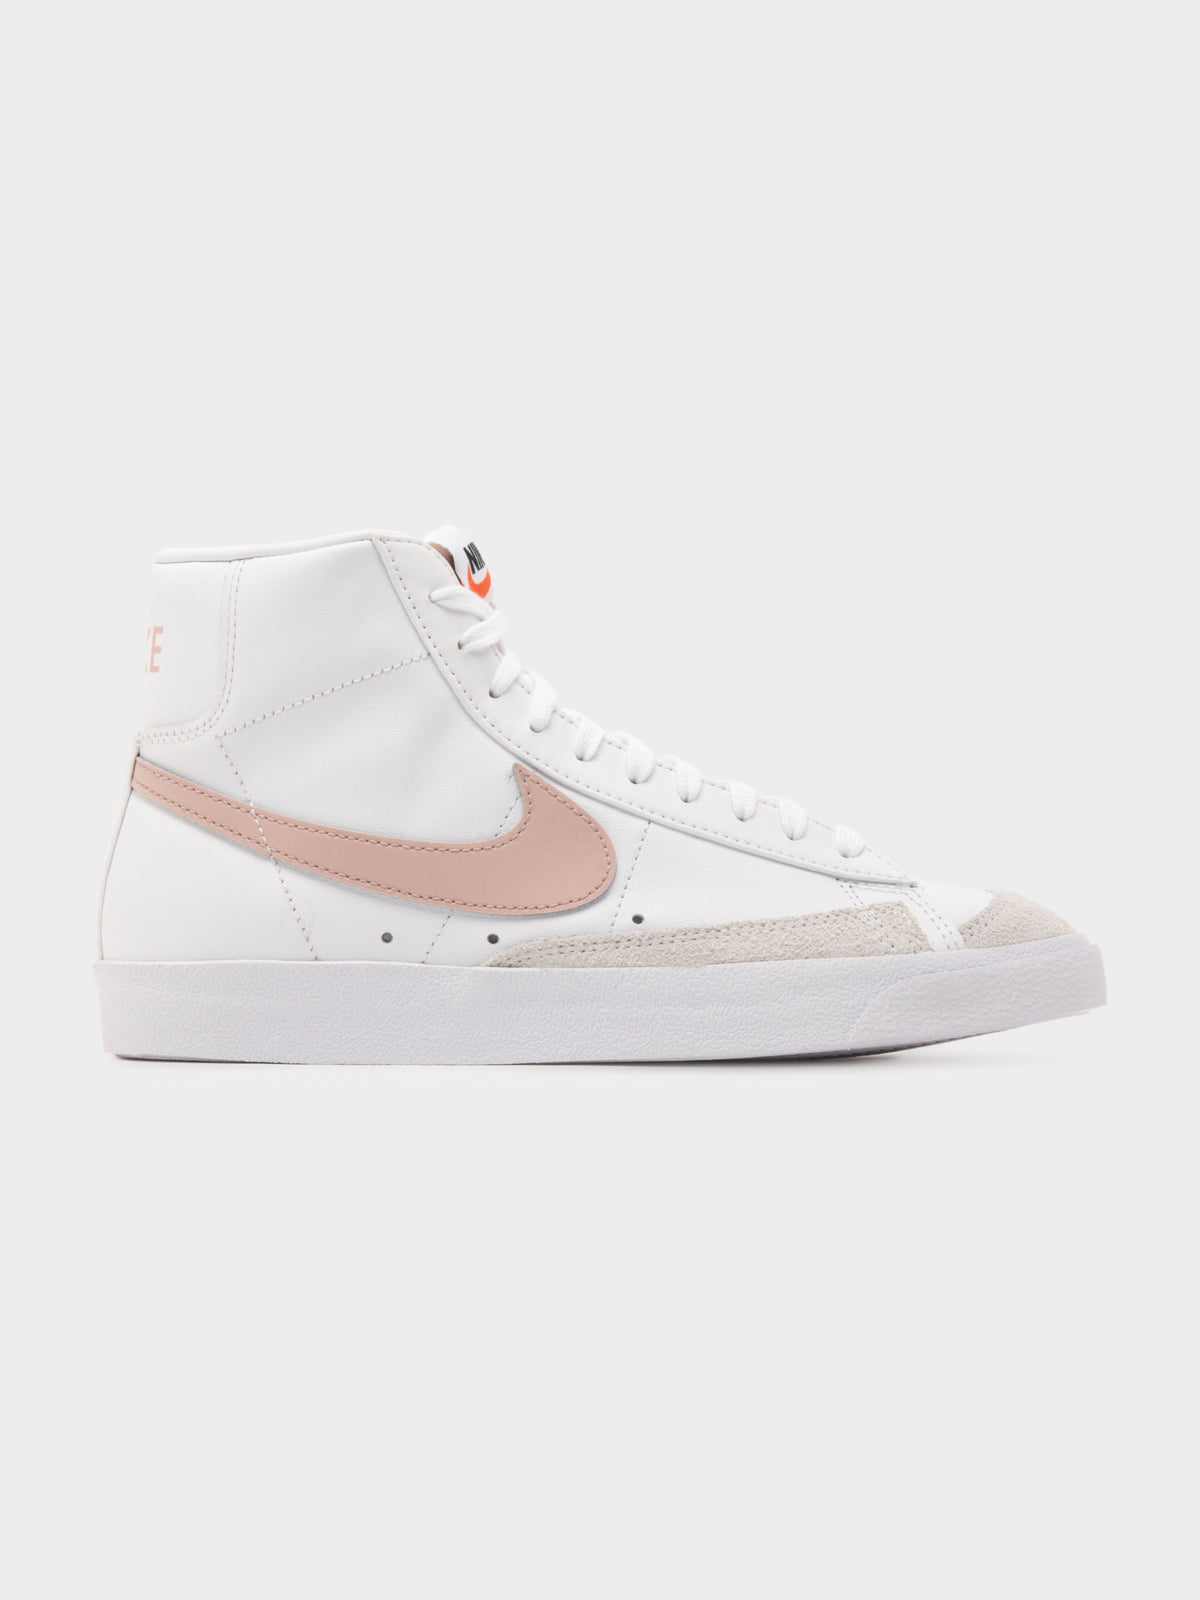 Womens Blazer Mid 77&#39; High Top Sneaker in White &amp; Pink Oxford